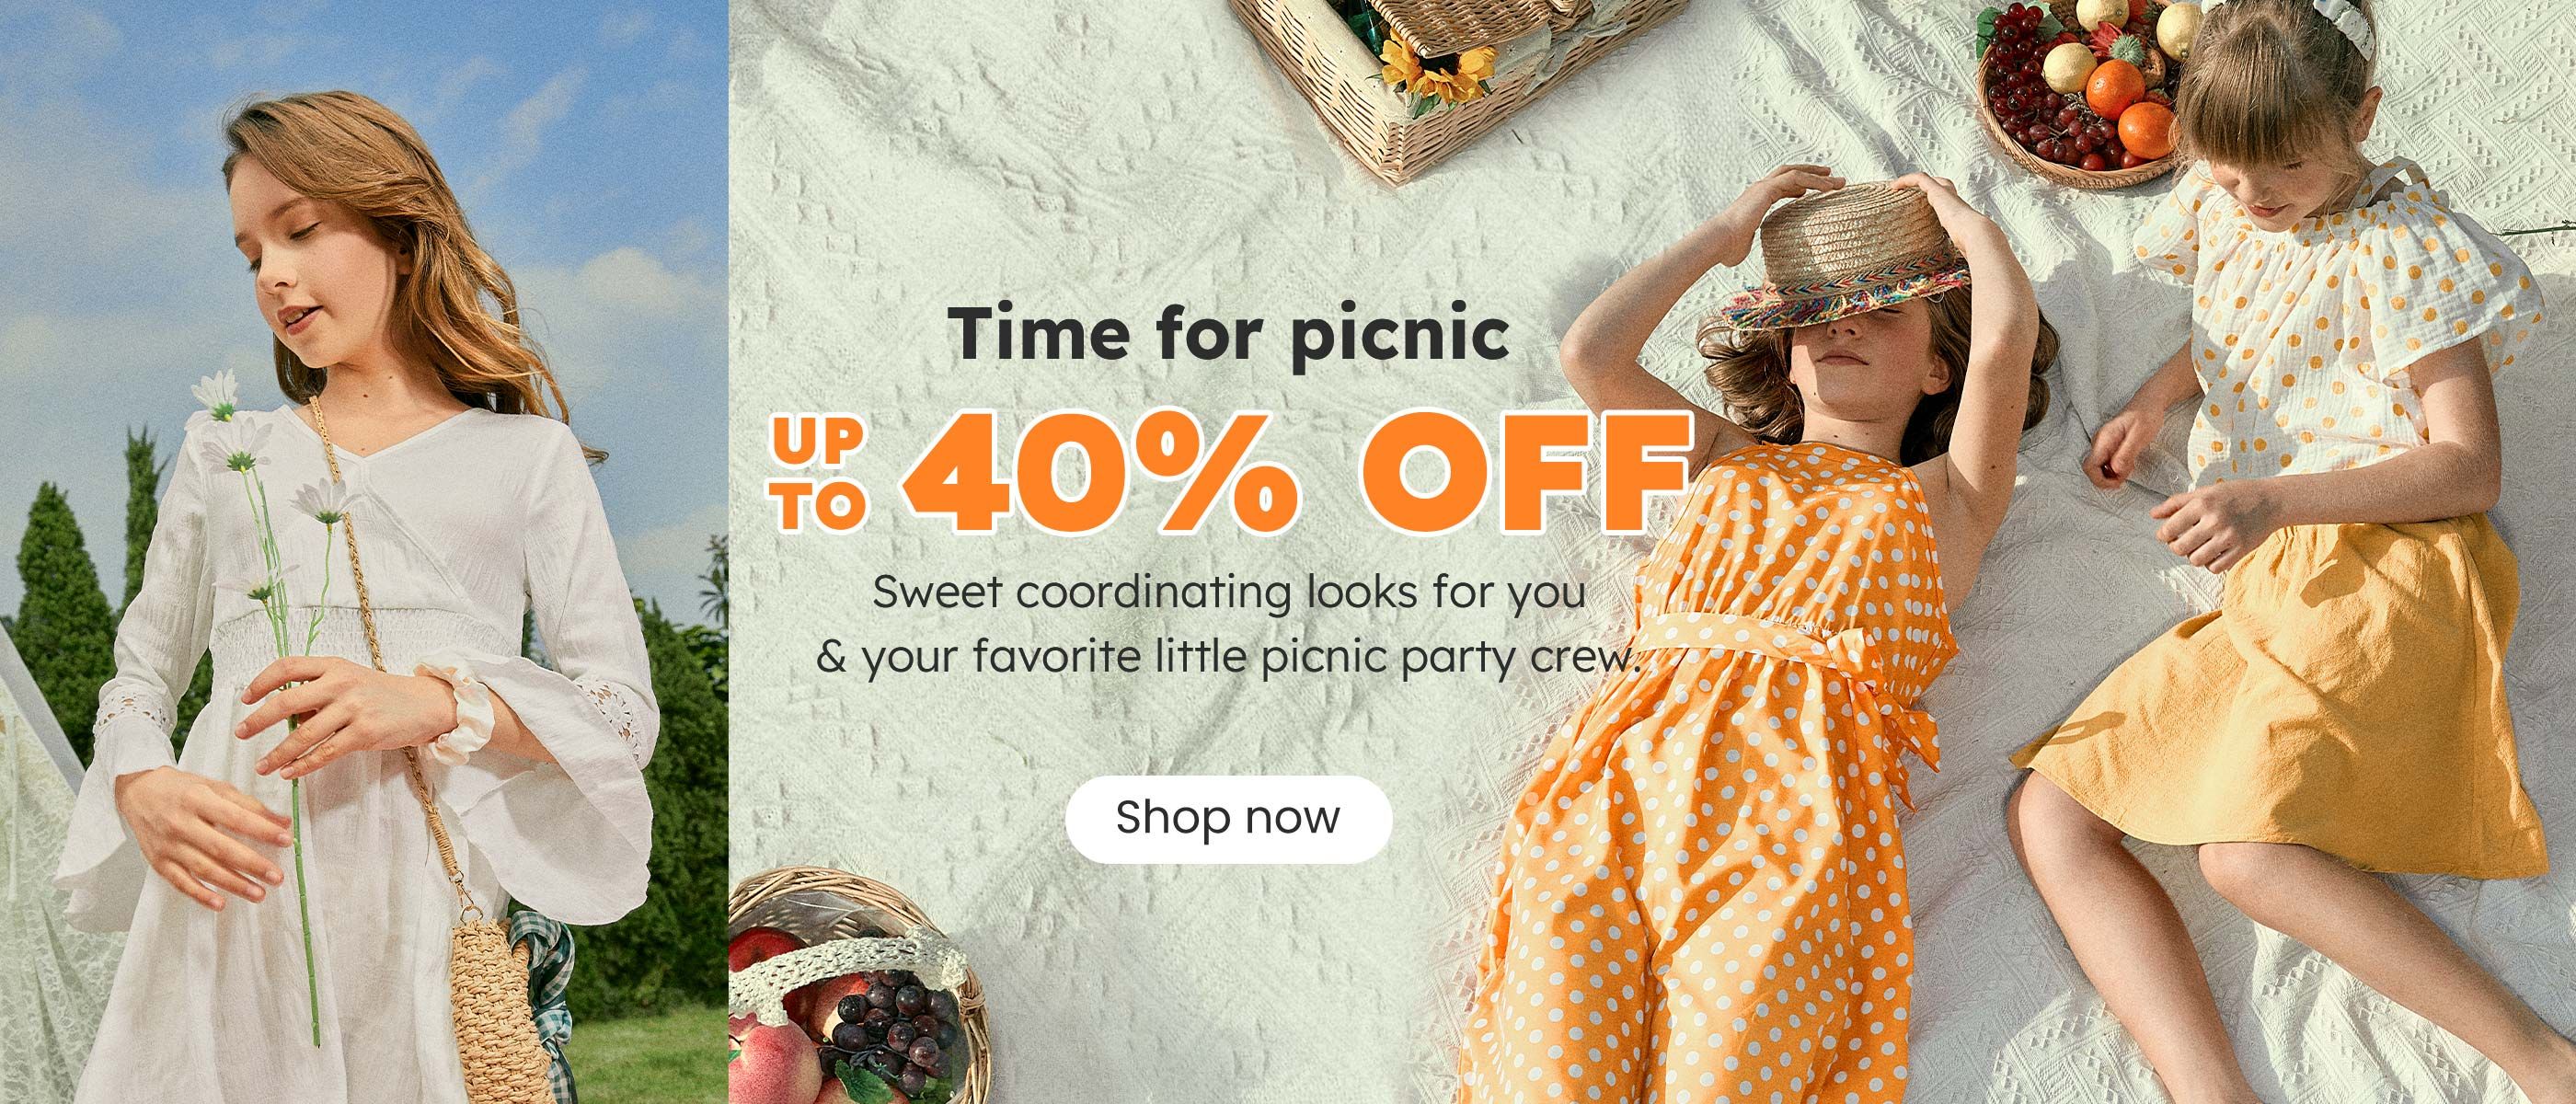 Click it to join Time for picnic activity